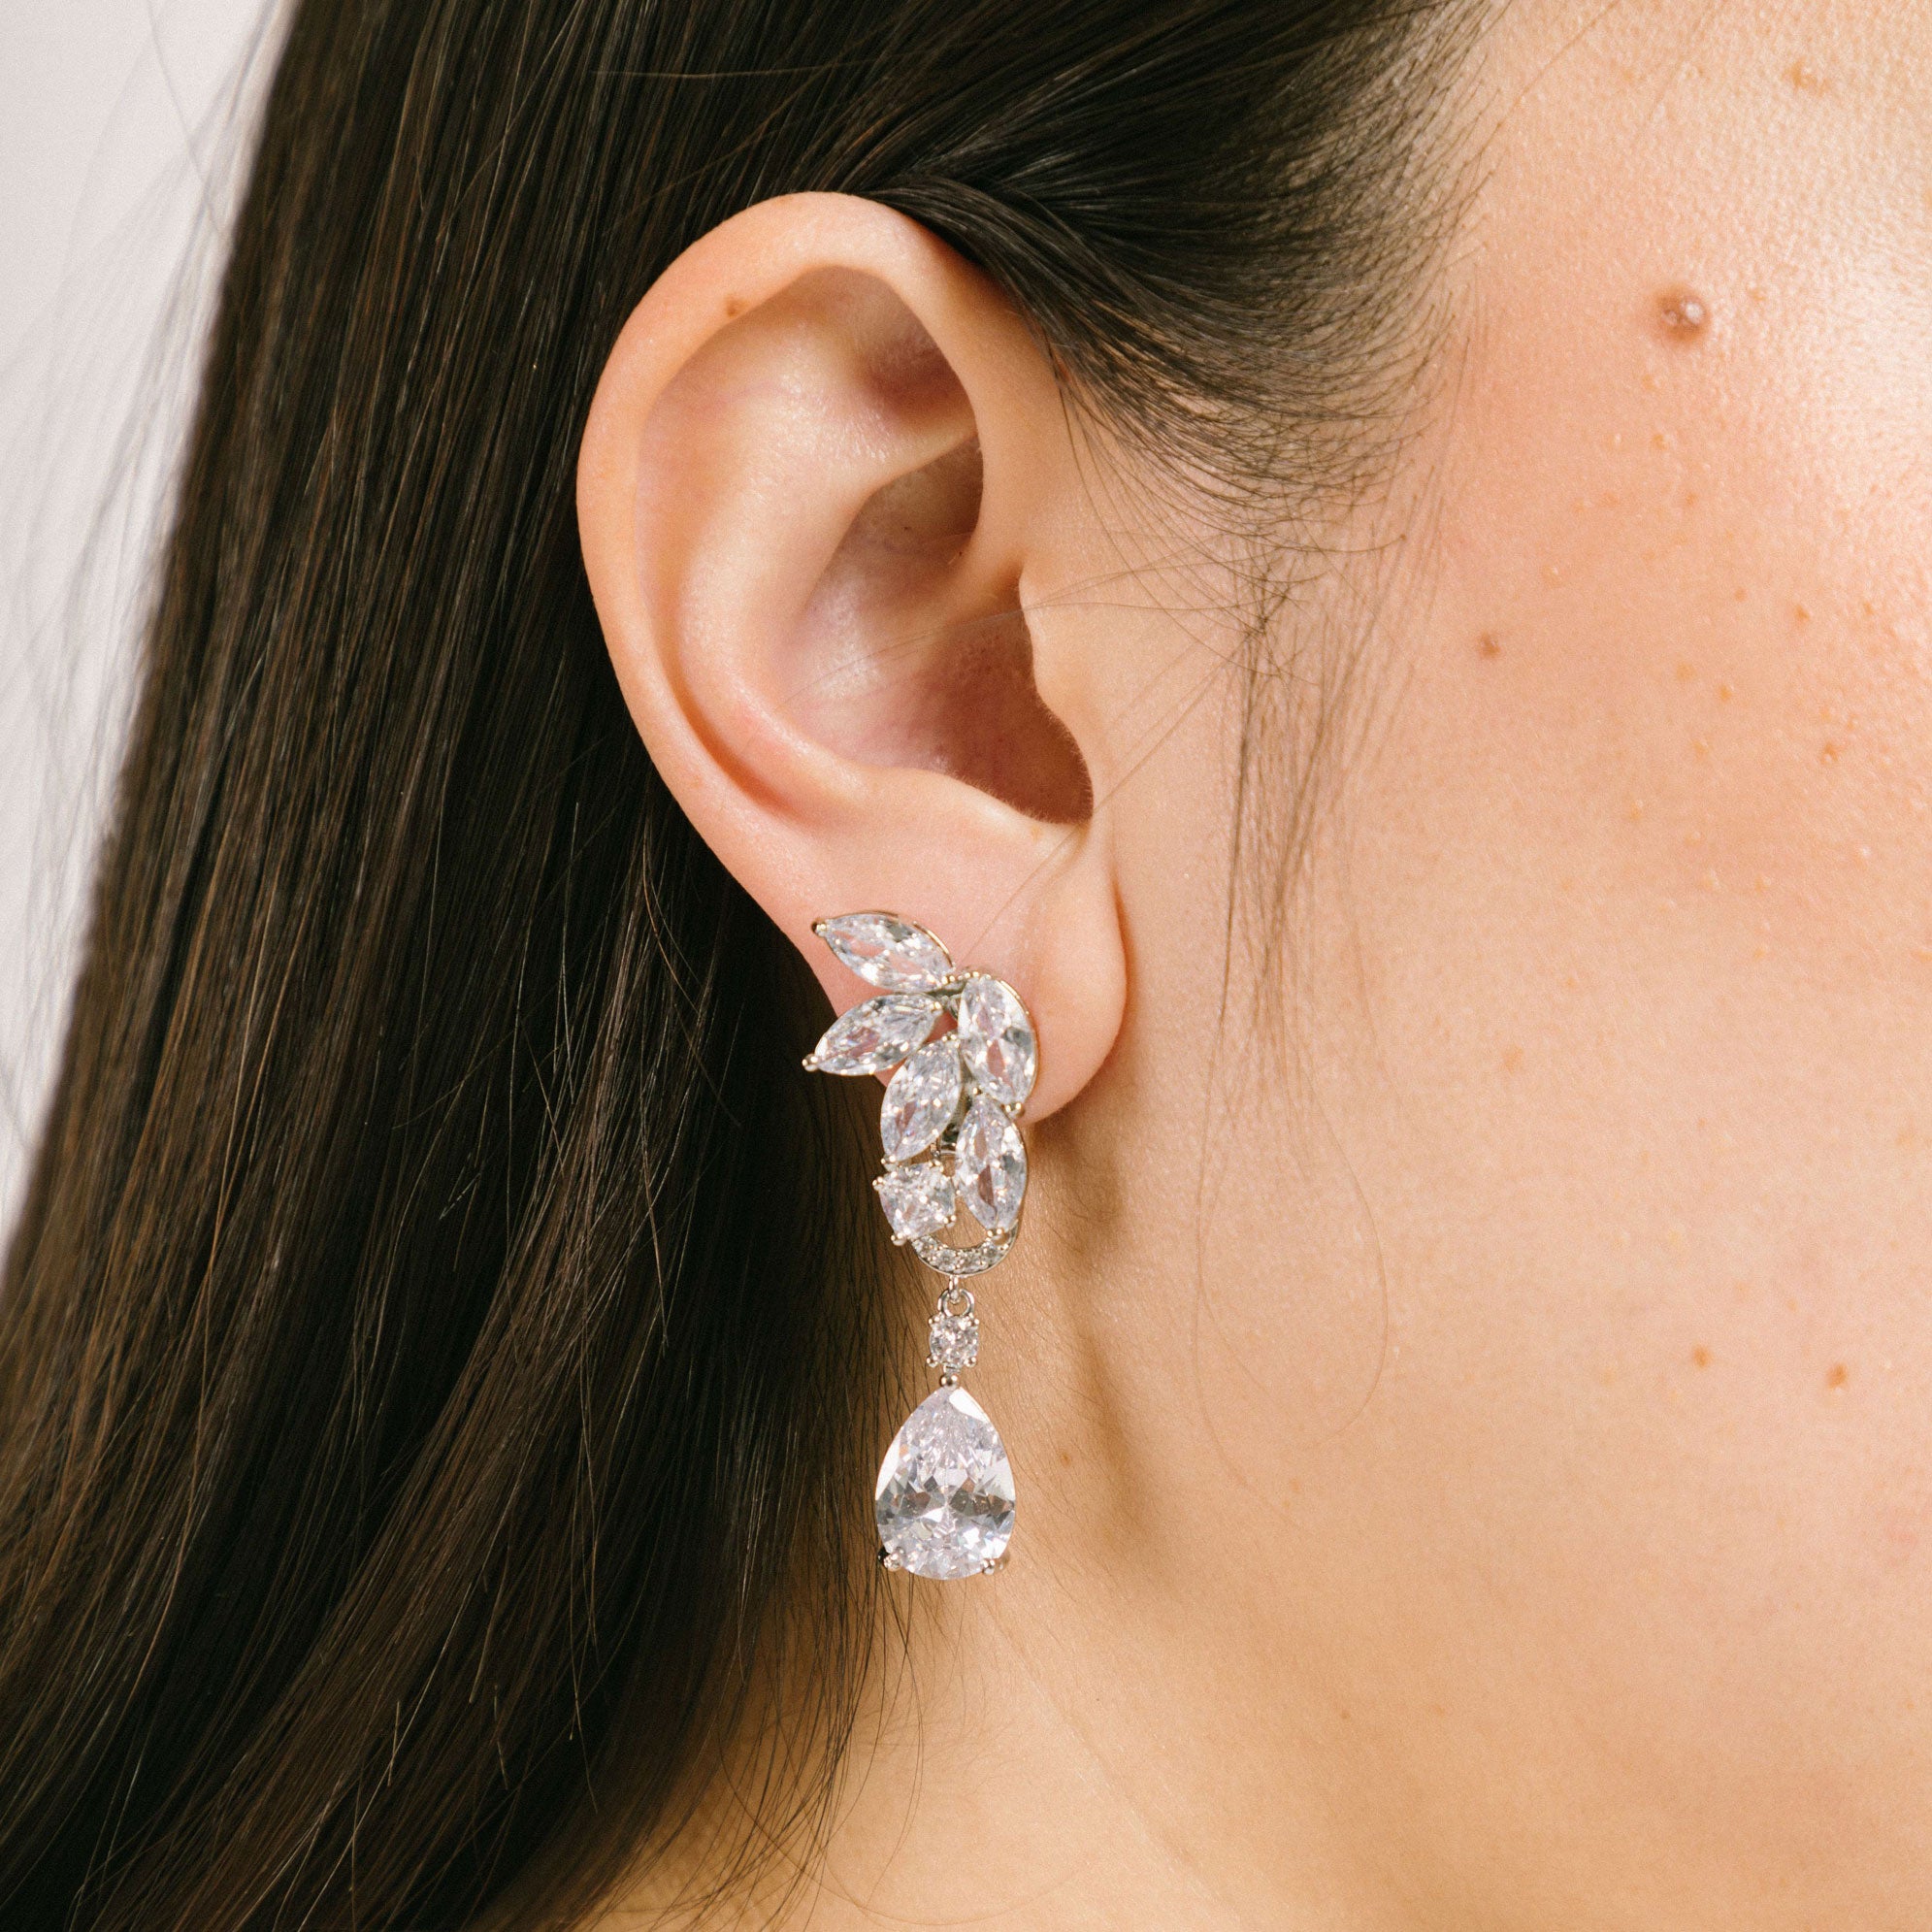 A model wearing the Layla Clip-On Earrings boast a secure and comfortable hold that can last up to 12 hours. Features include a padding clip-on closure, making it suitable for all ear types including thick, sensitive, thin, and stretched ears. Made from a silver plated, copper alloy and free of lead, nickel, and cadmium, this single pair of earrings is perfect for long-lasting wear. The removable rubber padding further promises an adjustable, comfortable fit.